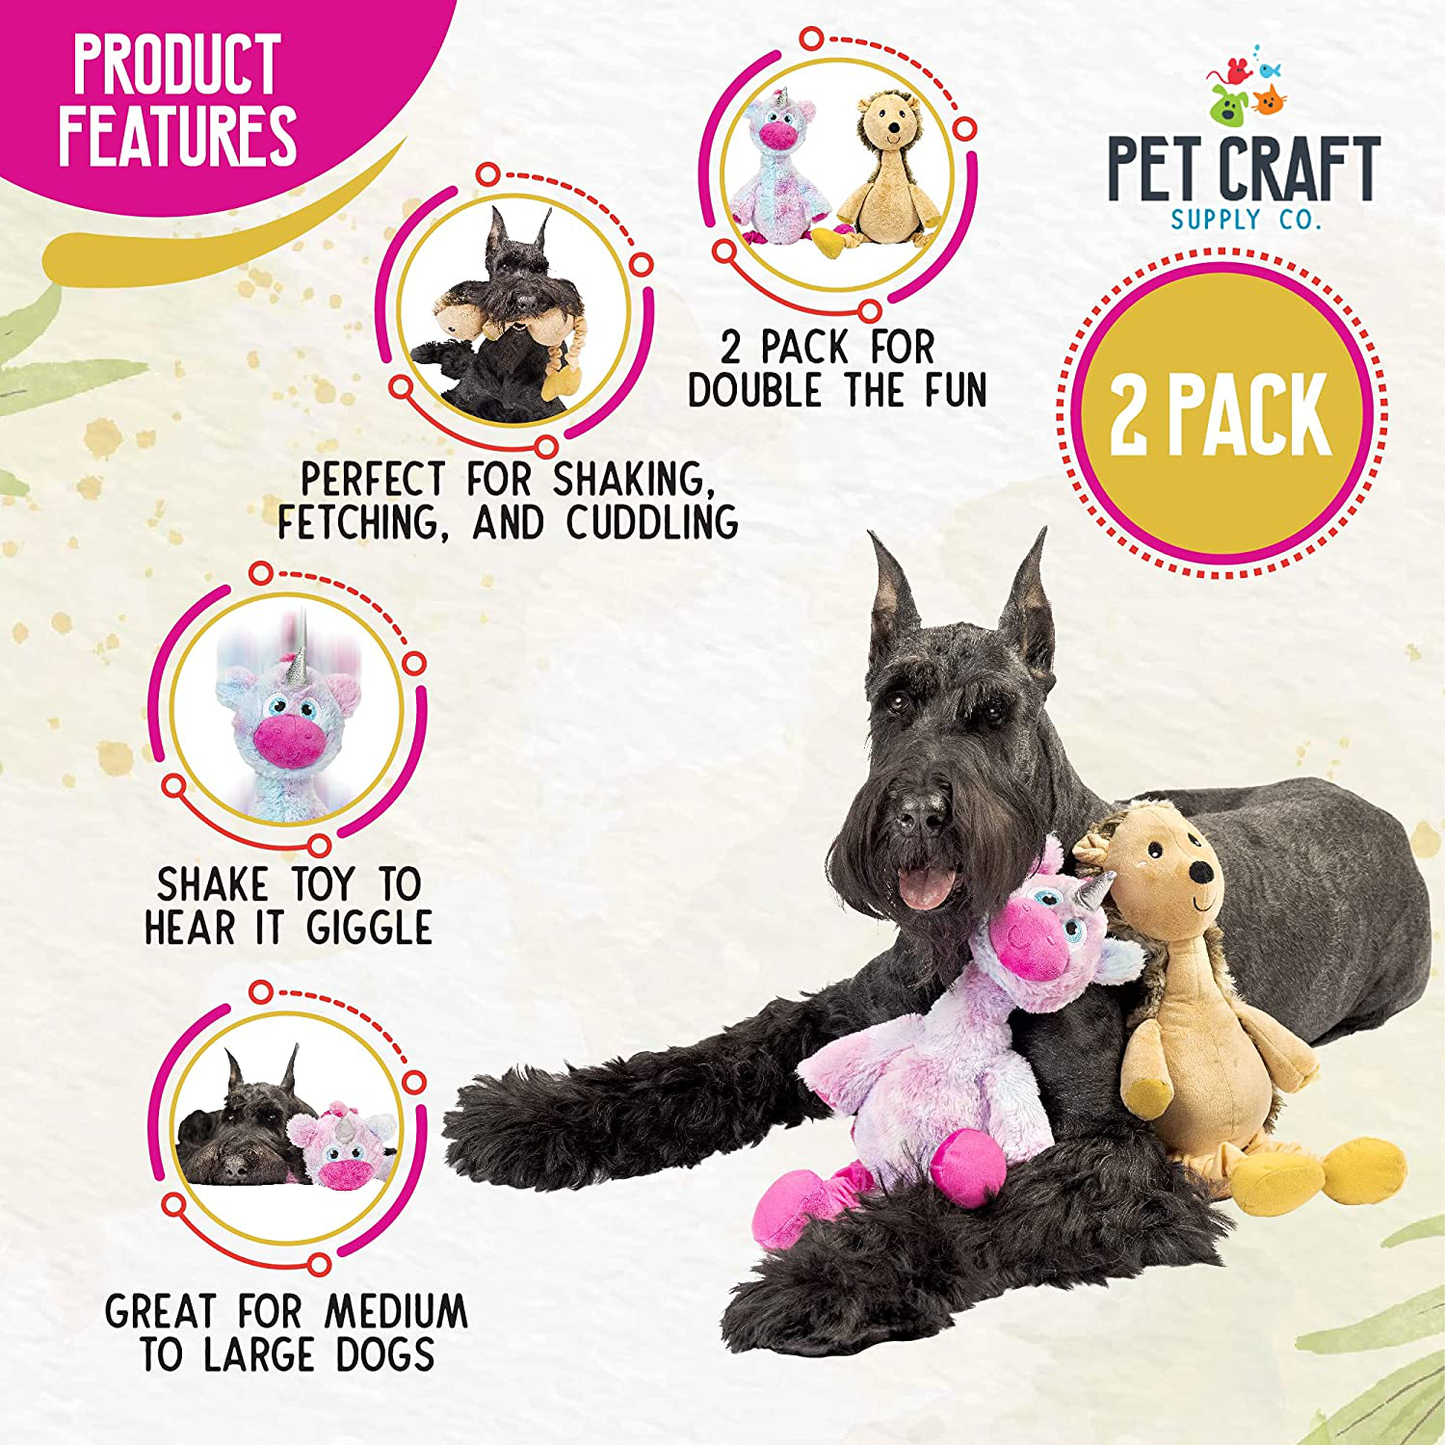 Pet Craft Supply Jiggle Giggle Dog Toys Funny Cute Giggling Sound Wiggly Shaking Tug Fetch Soft Chew Cuddle Plush Interactive Big Dog Toy for Medium to Large Breeds Multipack Boredom Relief